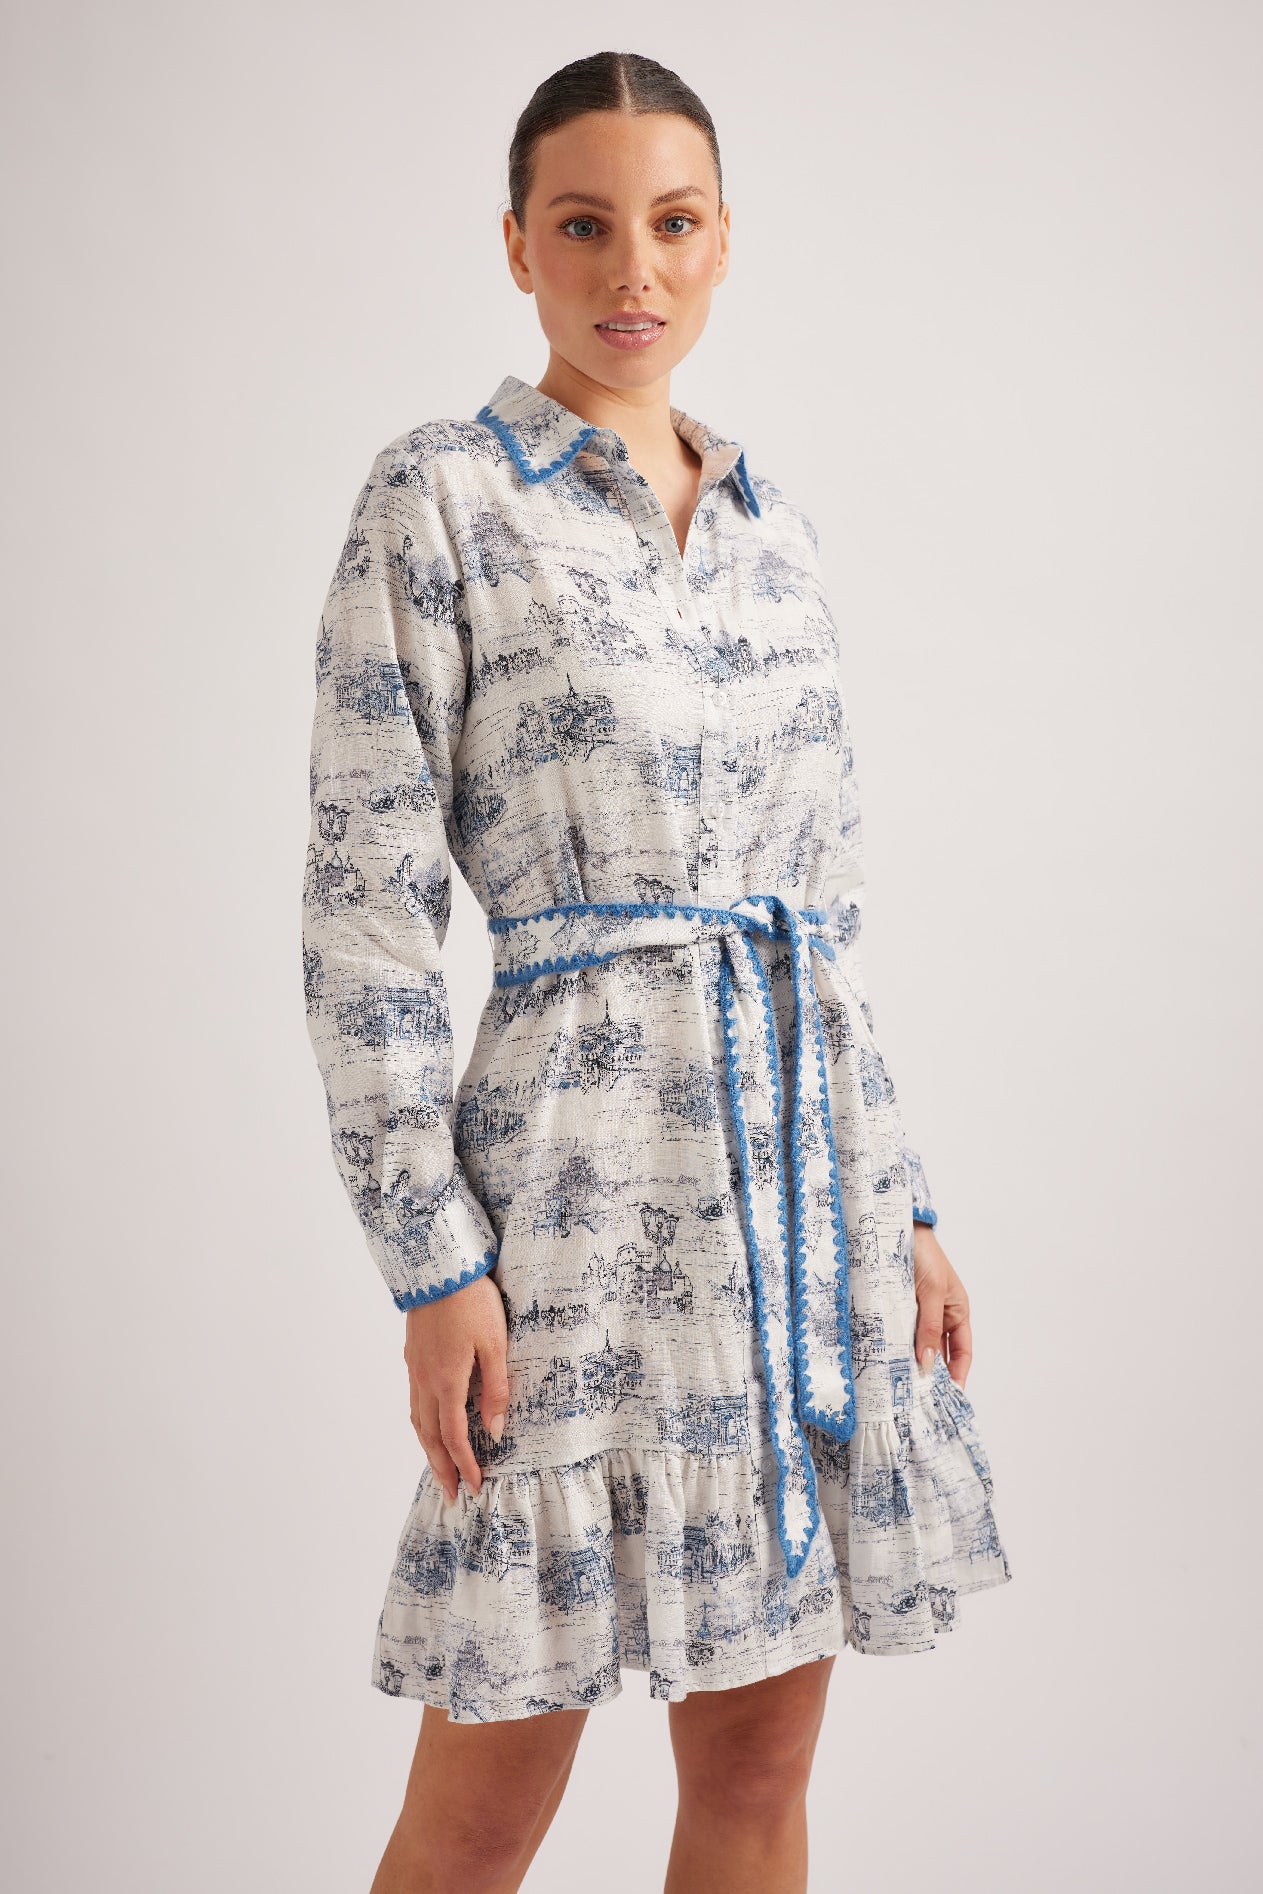 Alessandra Messina Linen Dress in Navy Blue French Toile